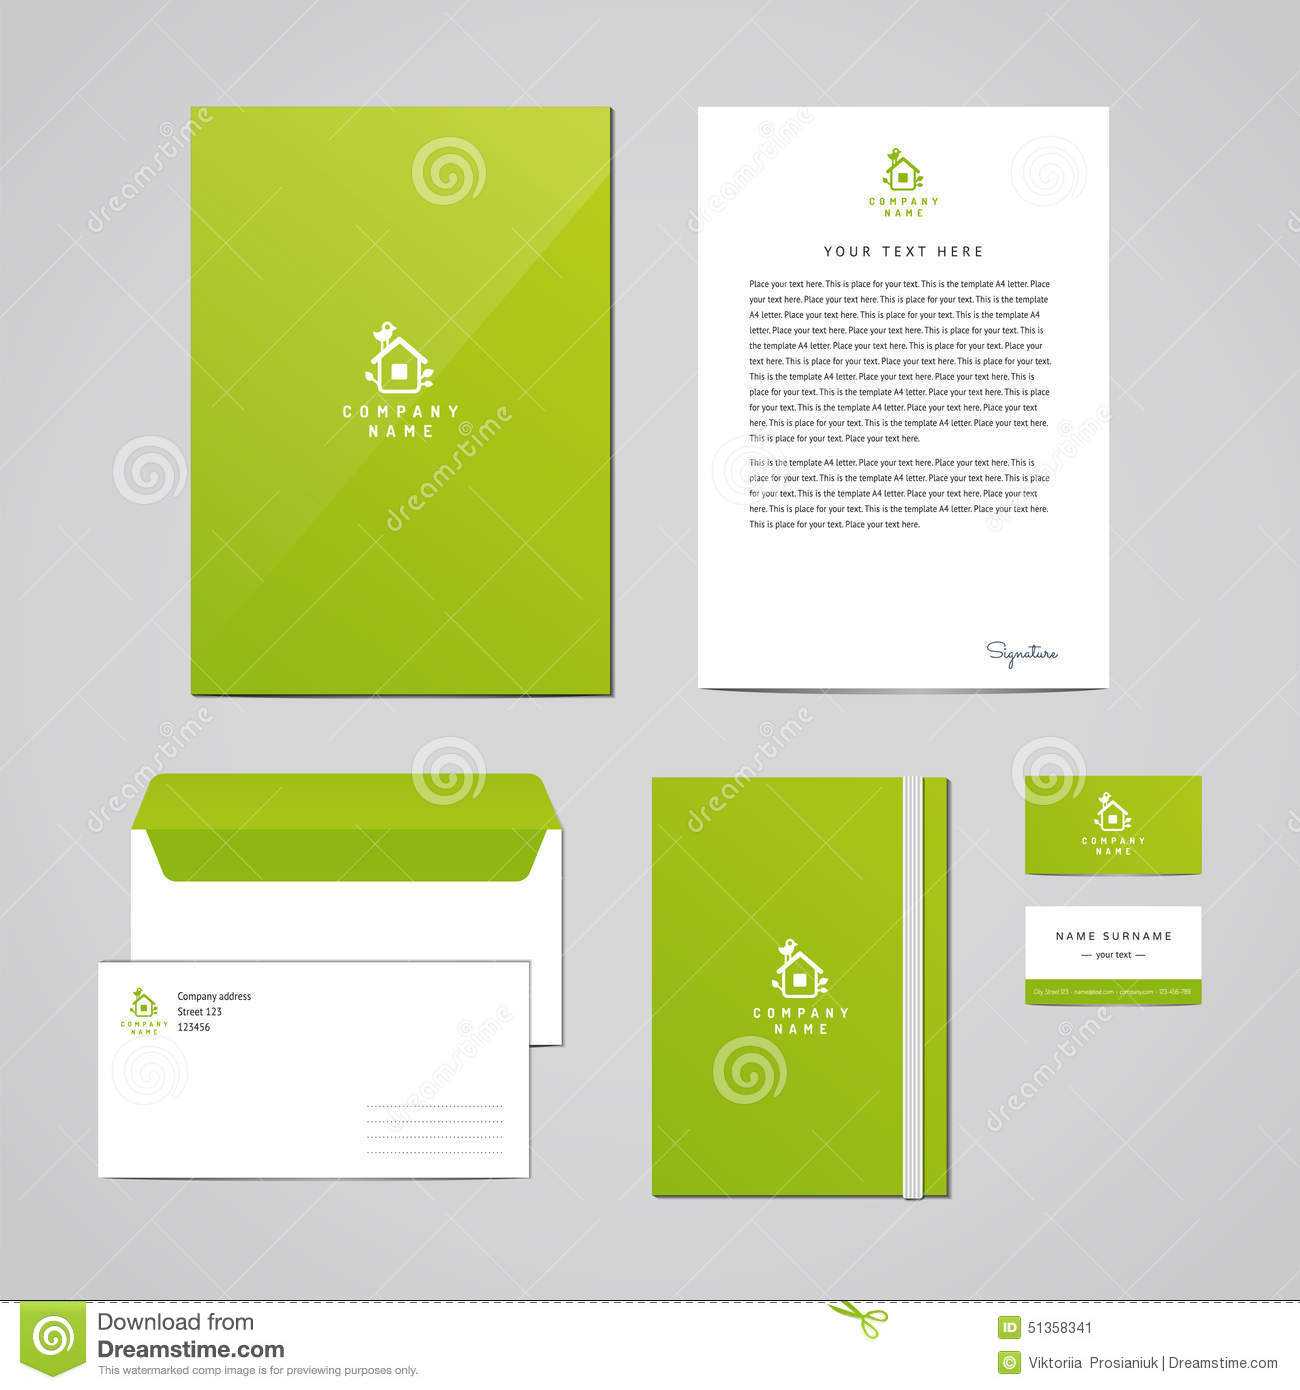 Corporate Identity Eco Design Template. Documentation For In Business Card Letterhead Envelope Template